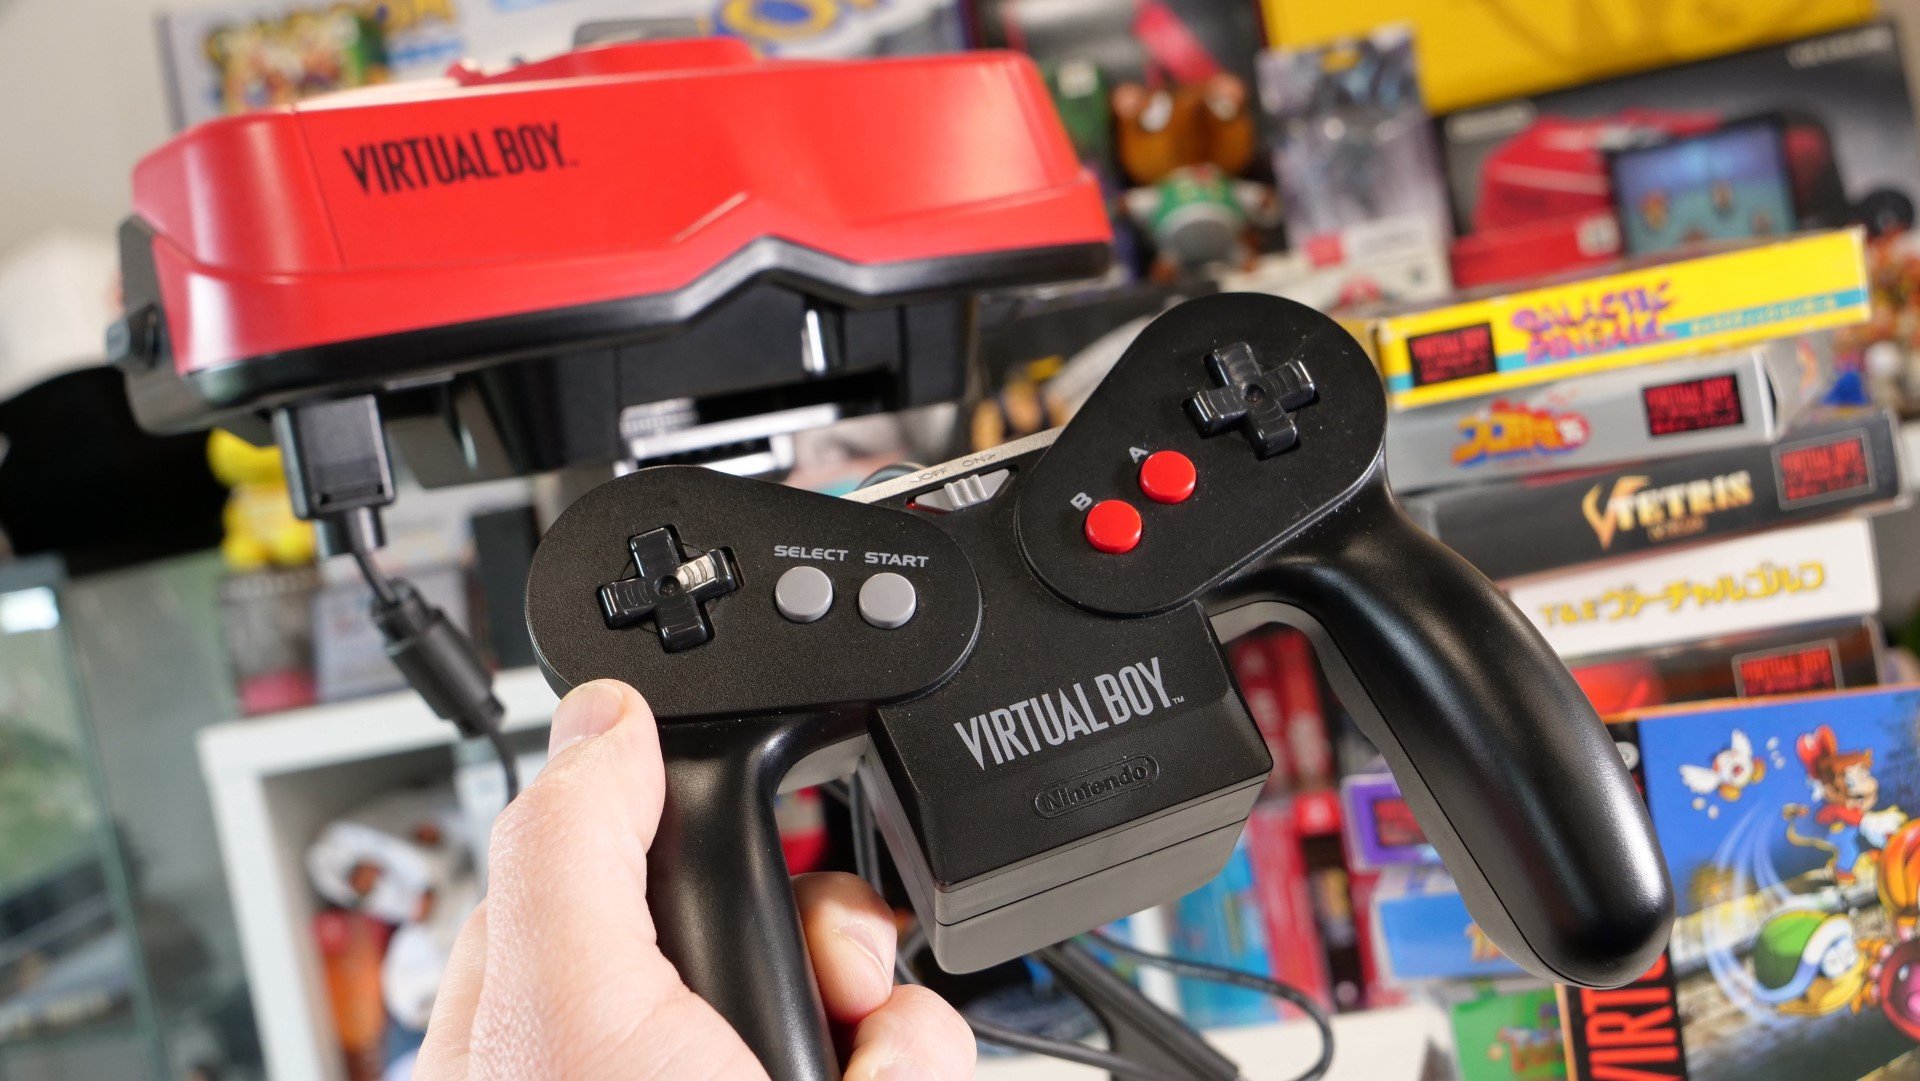 Virtual Boy Pad Console and games